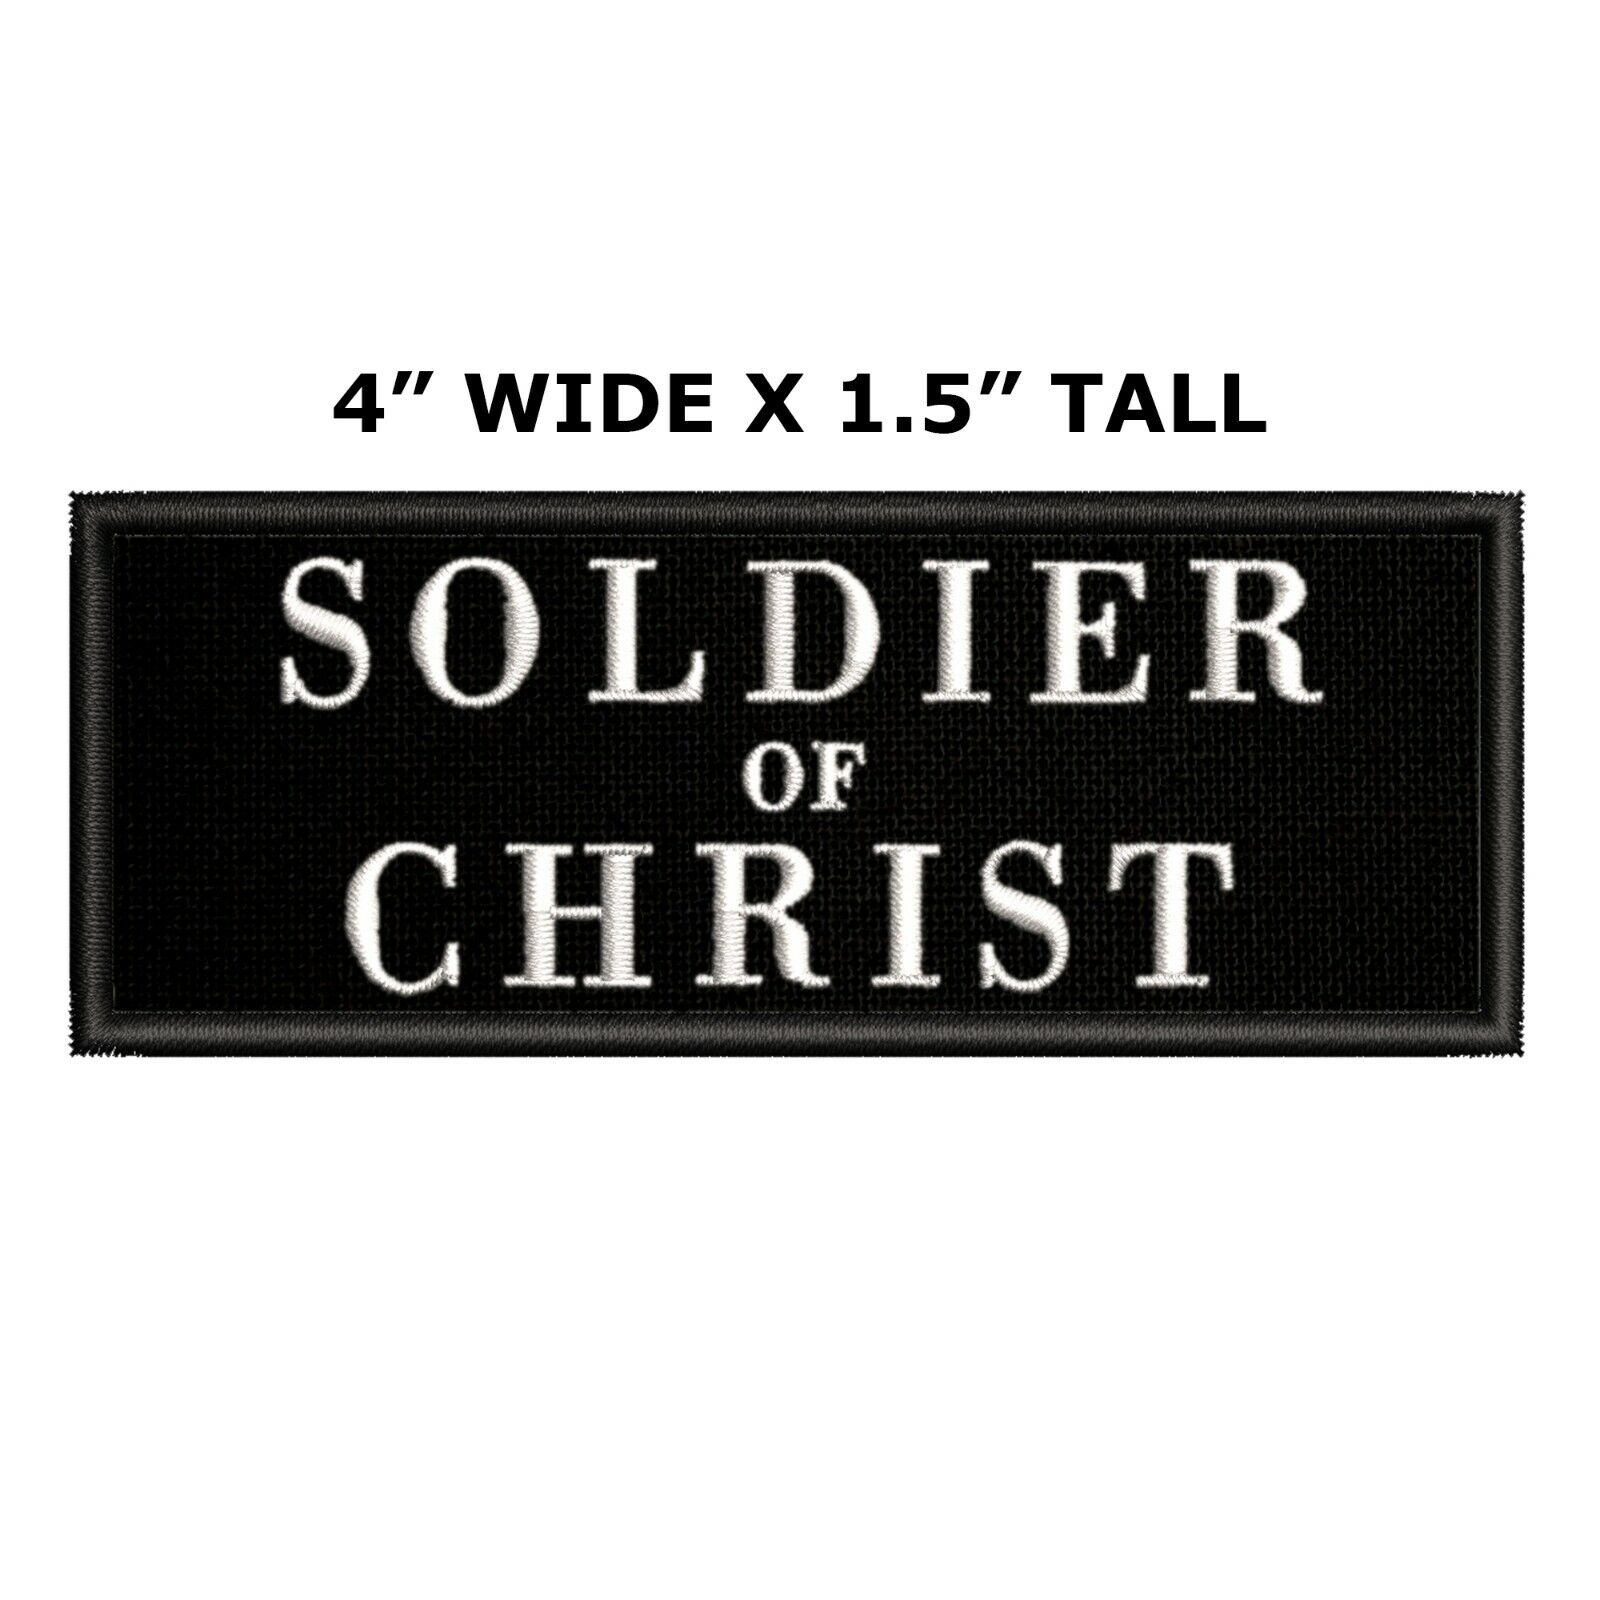 SOLDIER OF CHRIST Patch Embroidered Iron-On Applique Religious Jesus Bible Love